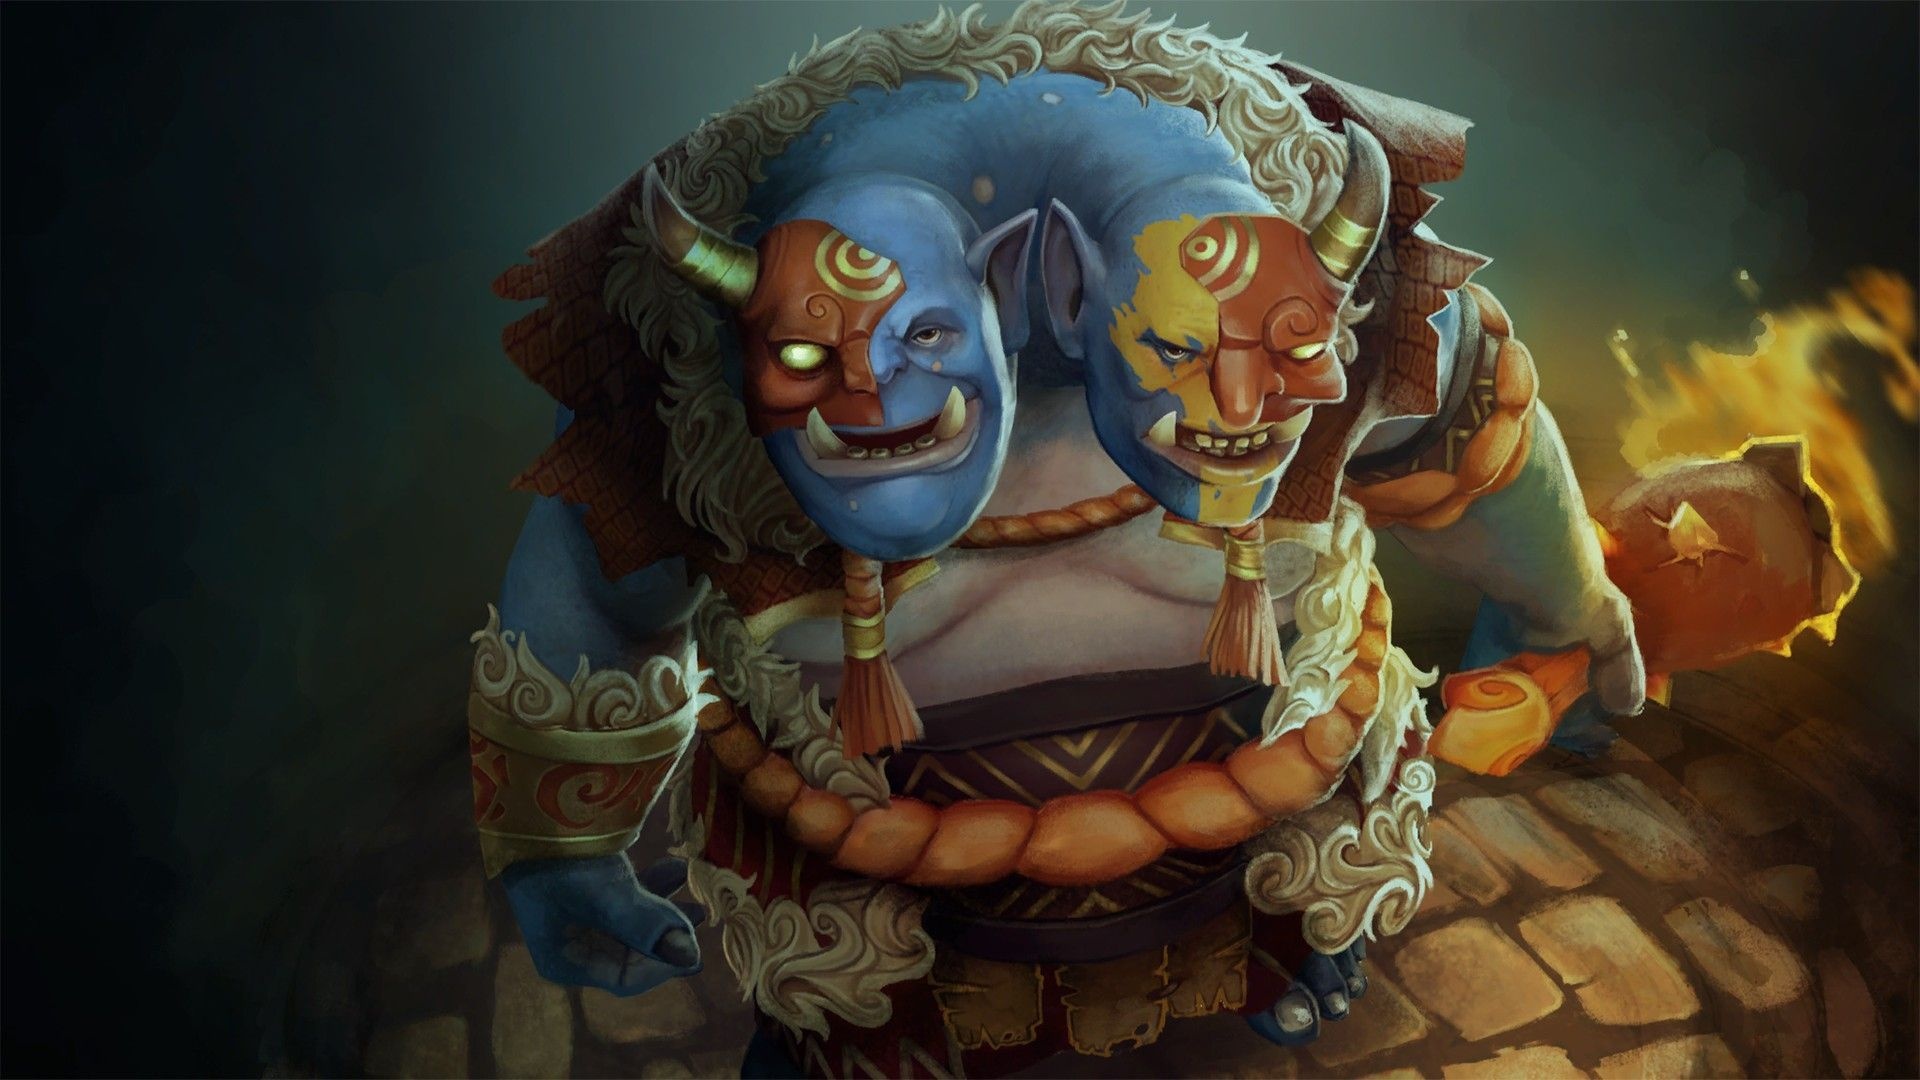 Ogre Magi wallpapers collection, Varied designs, Dota 2 character, Colorful backgrounds, 1920x1080 Full HD Desktop